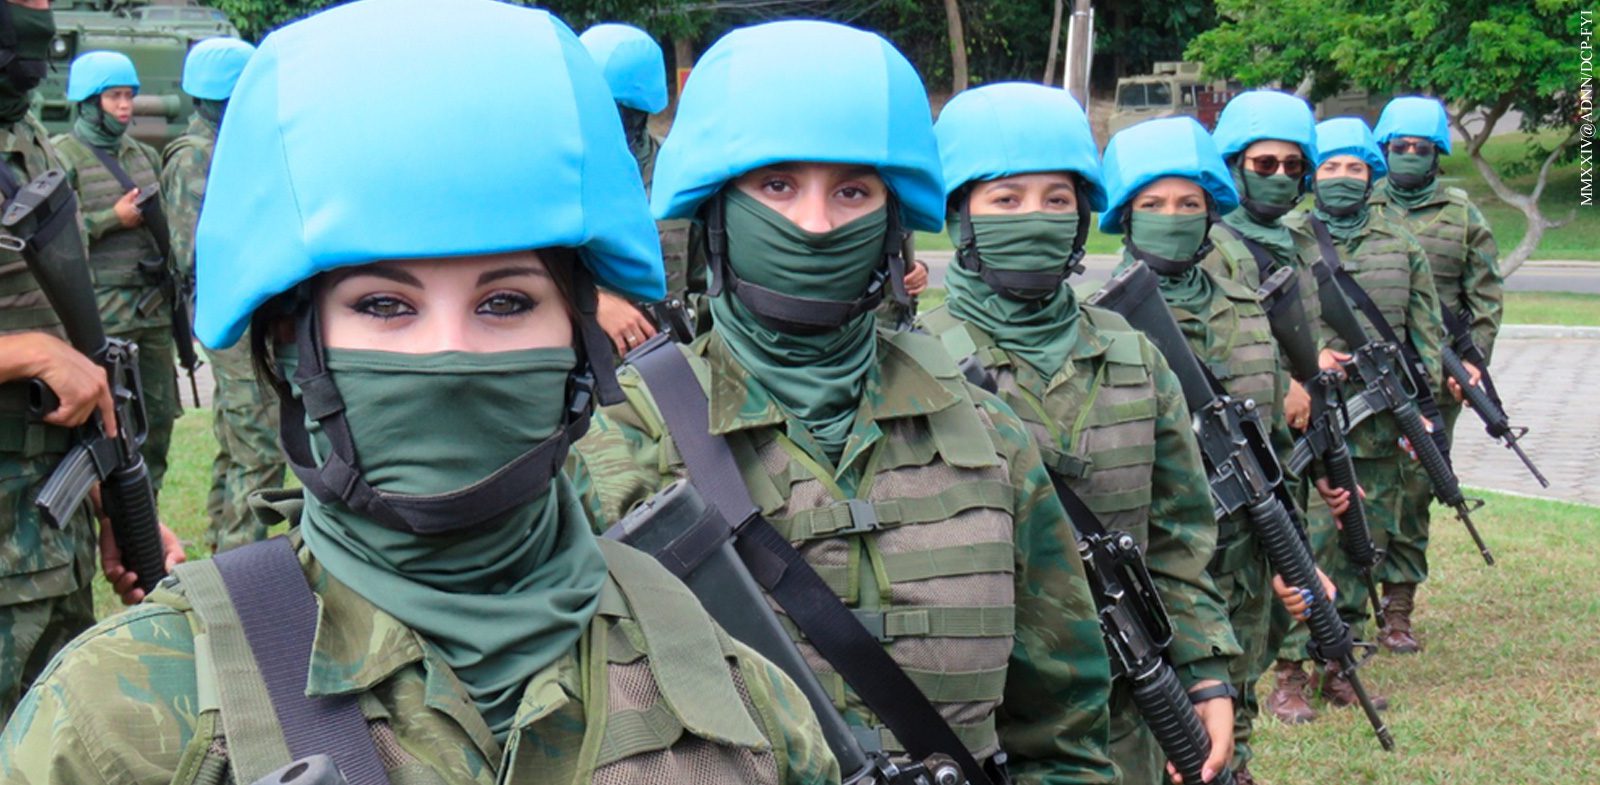 Contest for Brazilian Marine Soldier registers more than 5,000 women registered